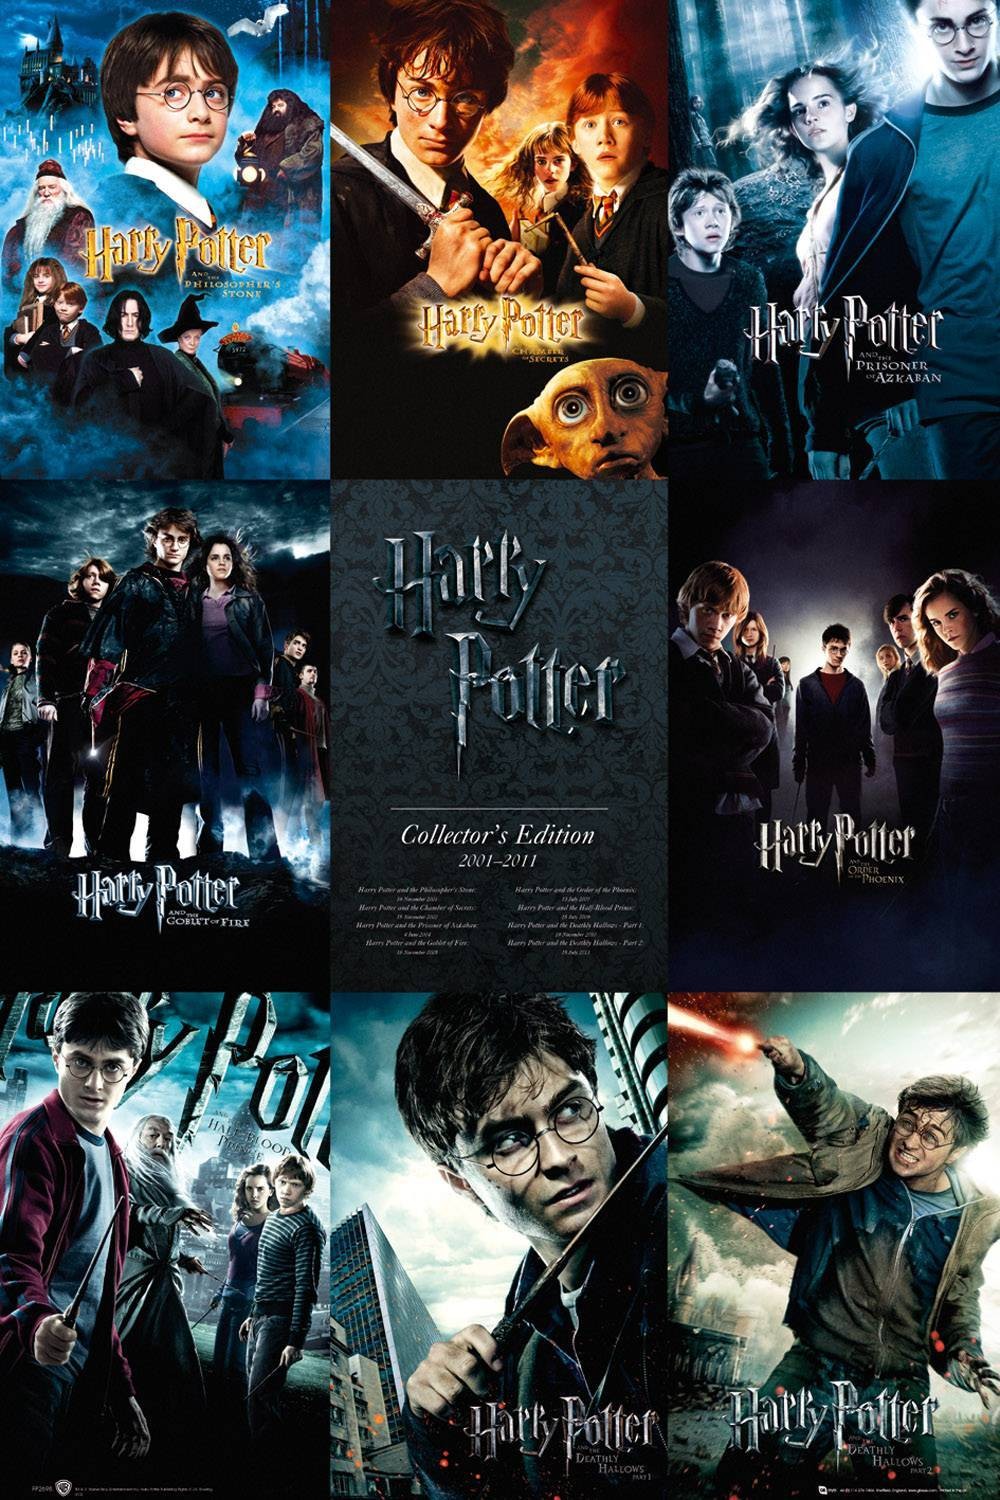 movie-series-harry-potter-to-hit-hbo-max-streaming-lineup-2